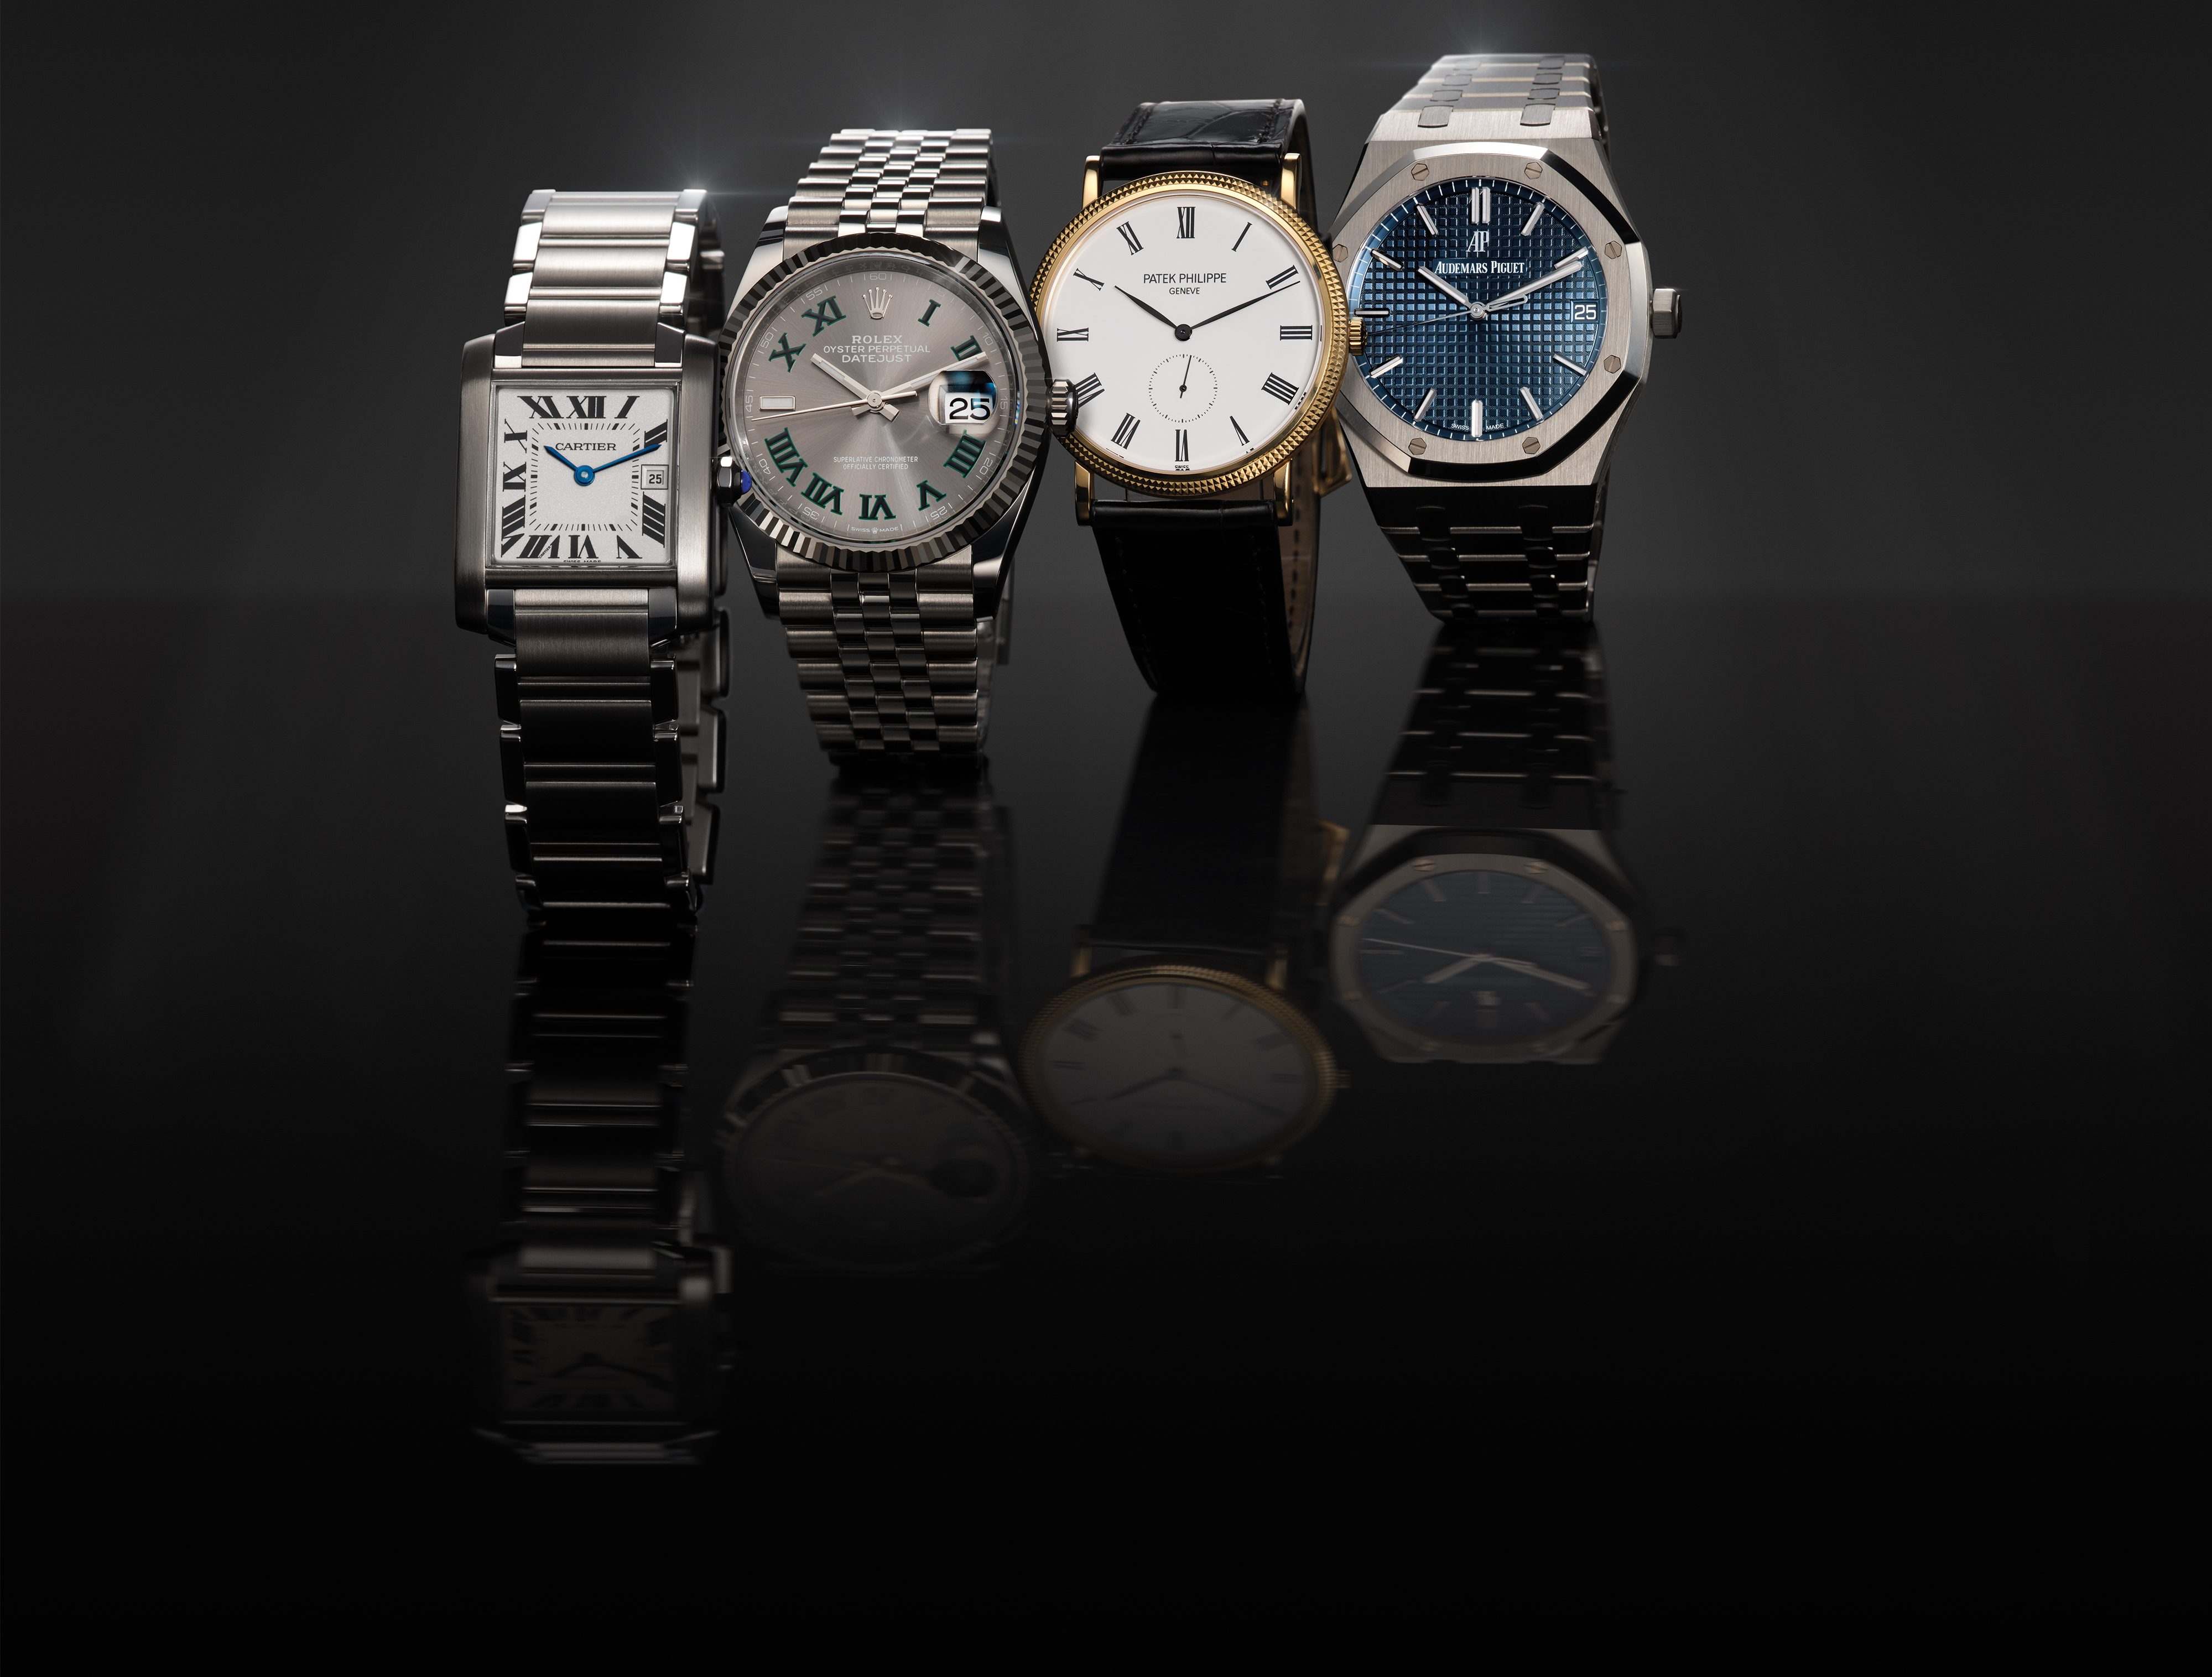 Popular 1960s Vintage Watches | Bob's Watches